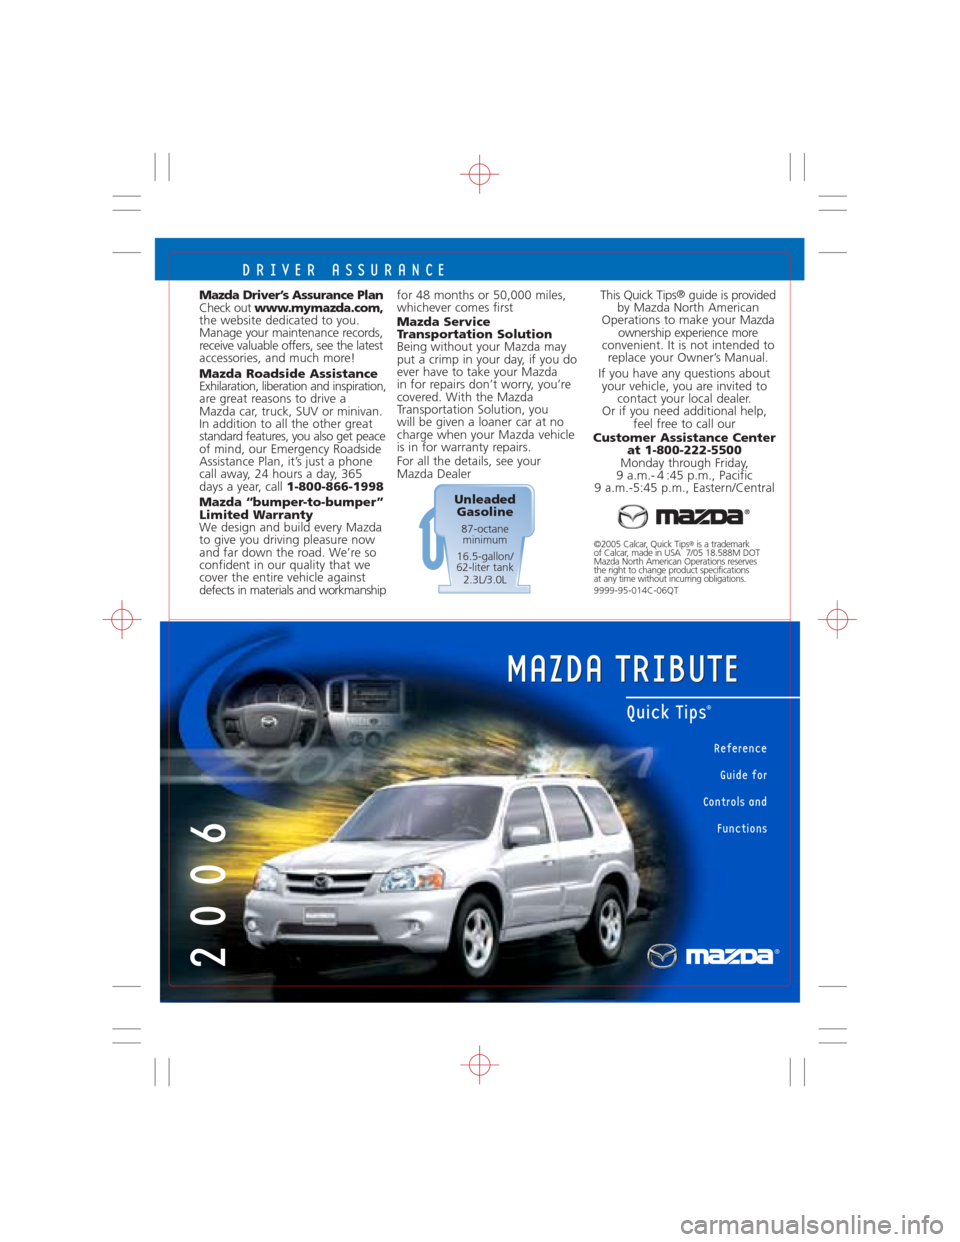 MAZDA MODEL TRIBUTE 2006  Quick Tips (in English) DRIVER ASSURANCE
for 48 months or 50,000 miles,
whichever comes first
Mazda Service
Transportation Solution
Being without your Mazda may
put a crimp in your day, if you do
ever have to take your Mazda